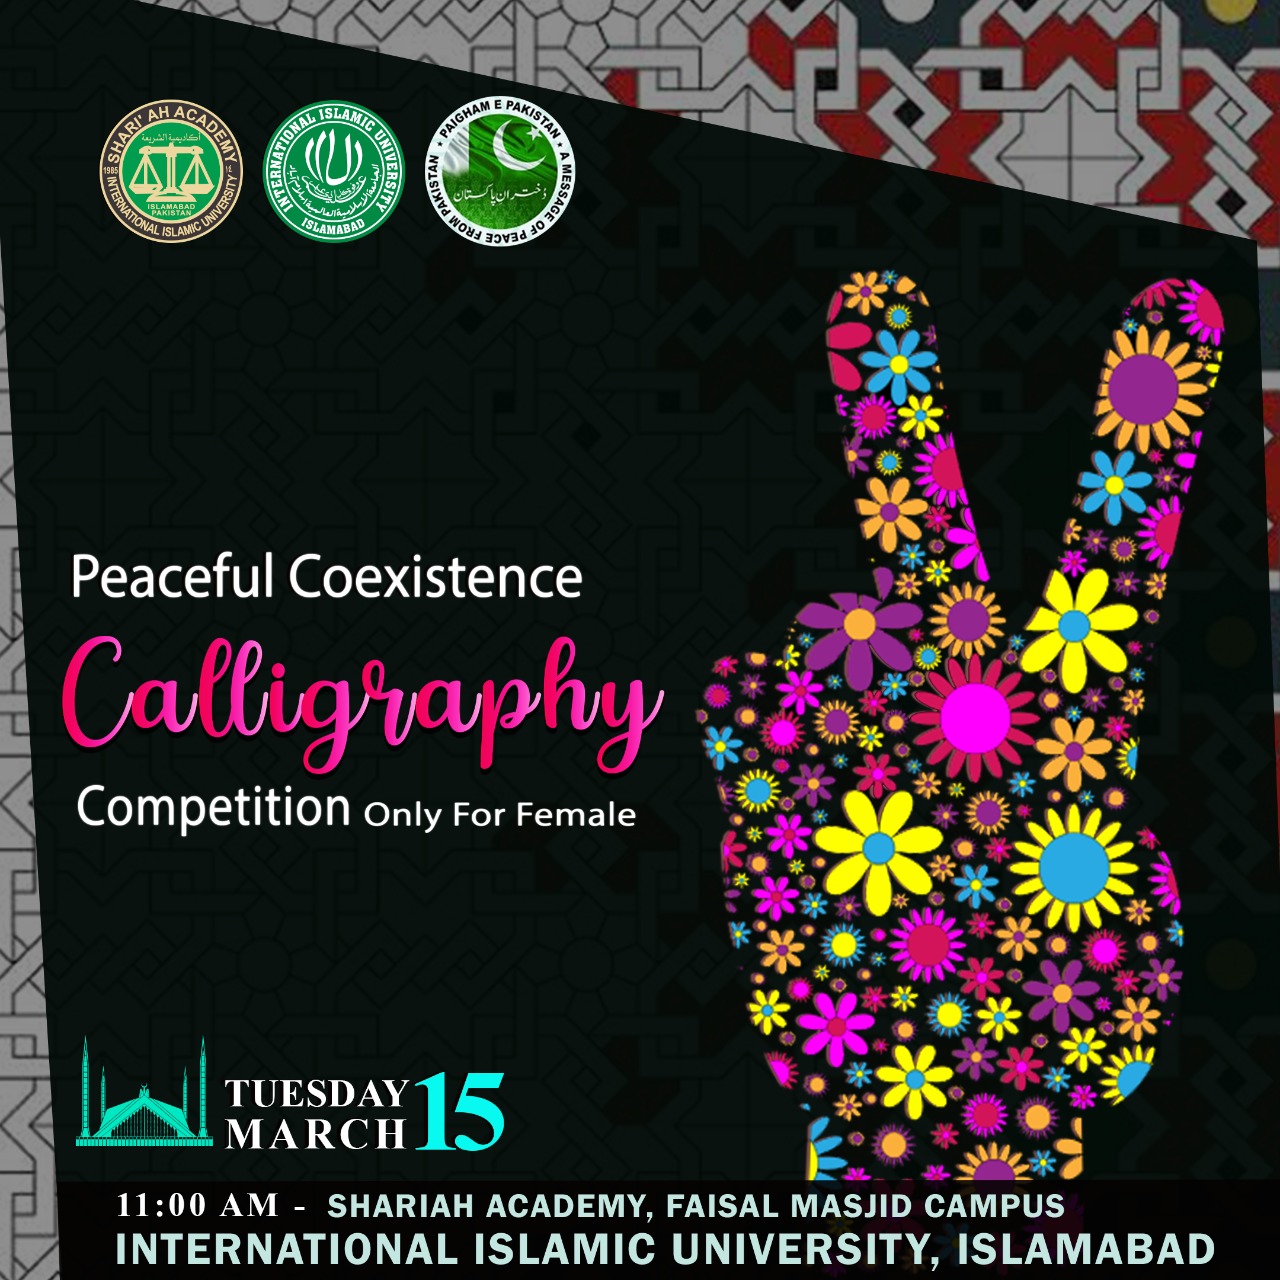 Sharī‘ah Academy to organize a “Peaceful Coexistence calligraphy competition” and a “Nature and Harmony painting competition”